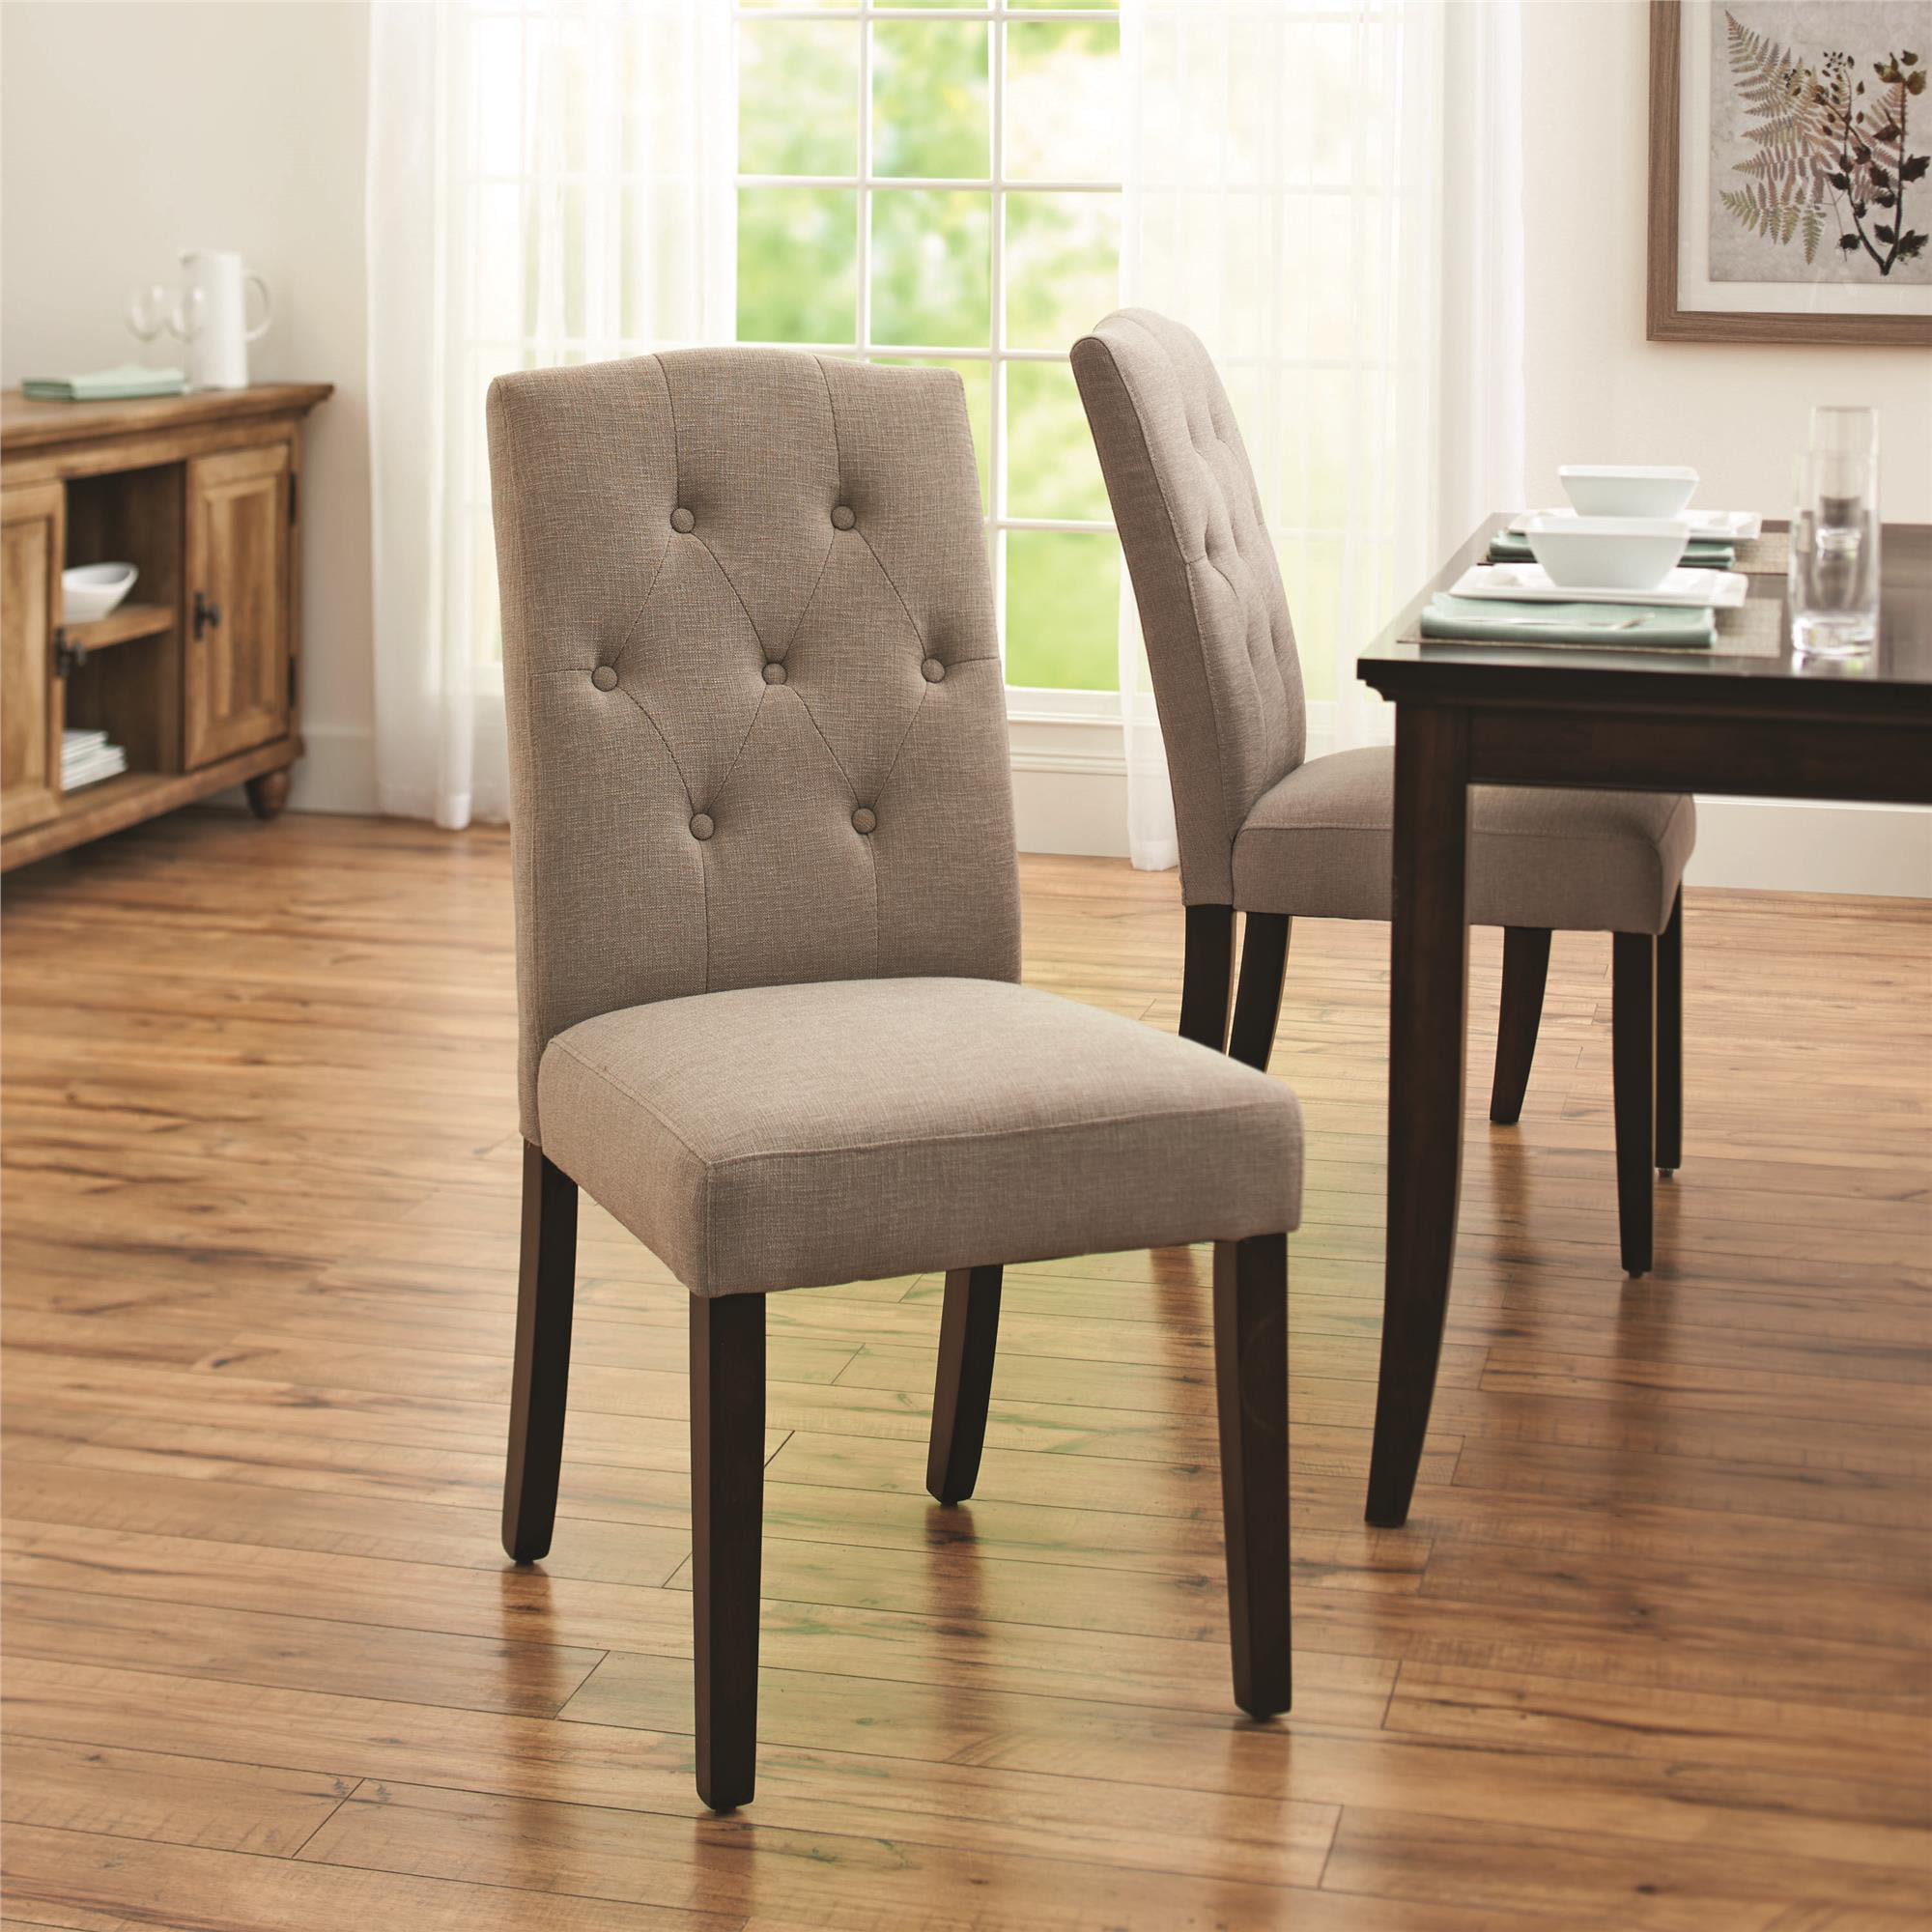 Better Homes and Gardens Parsons Upholstered Tufted Dining Chair,Taupe ...